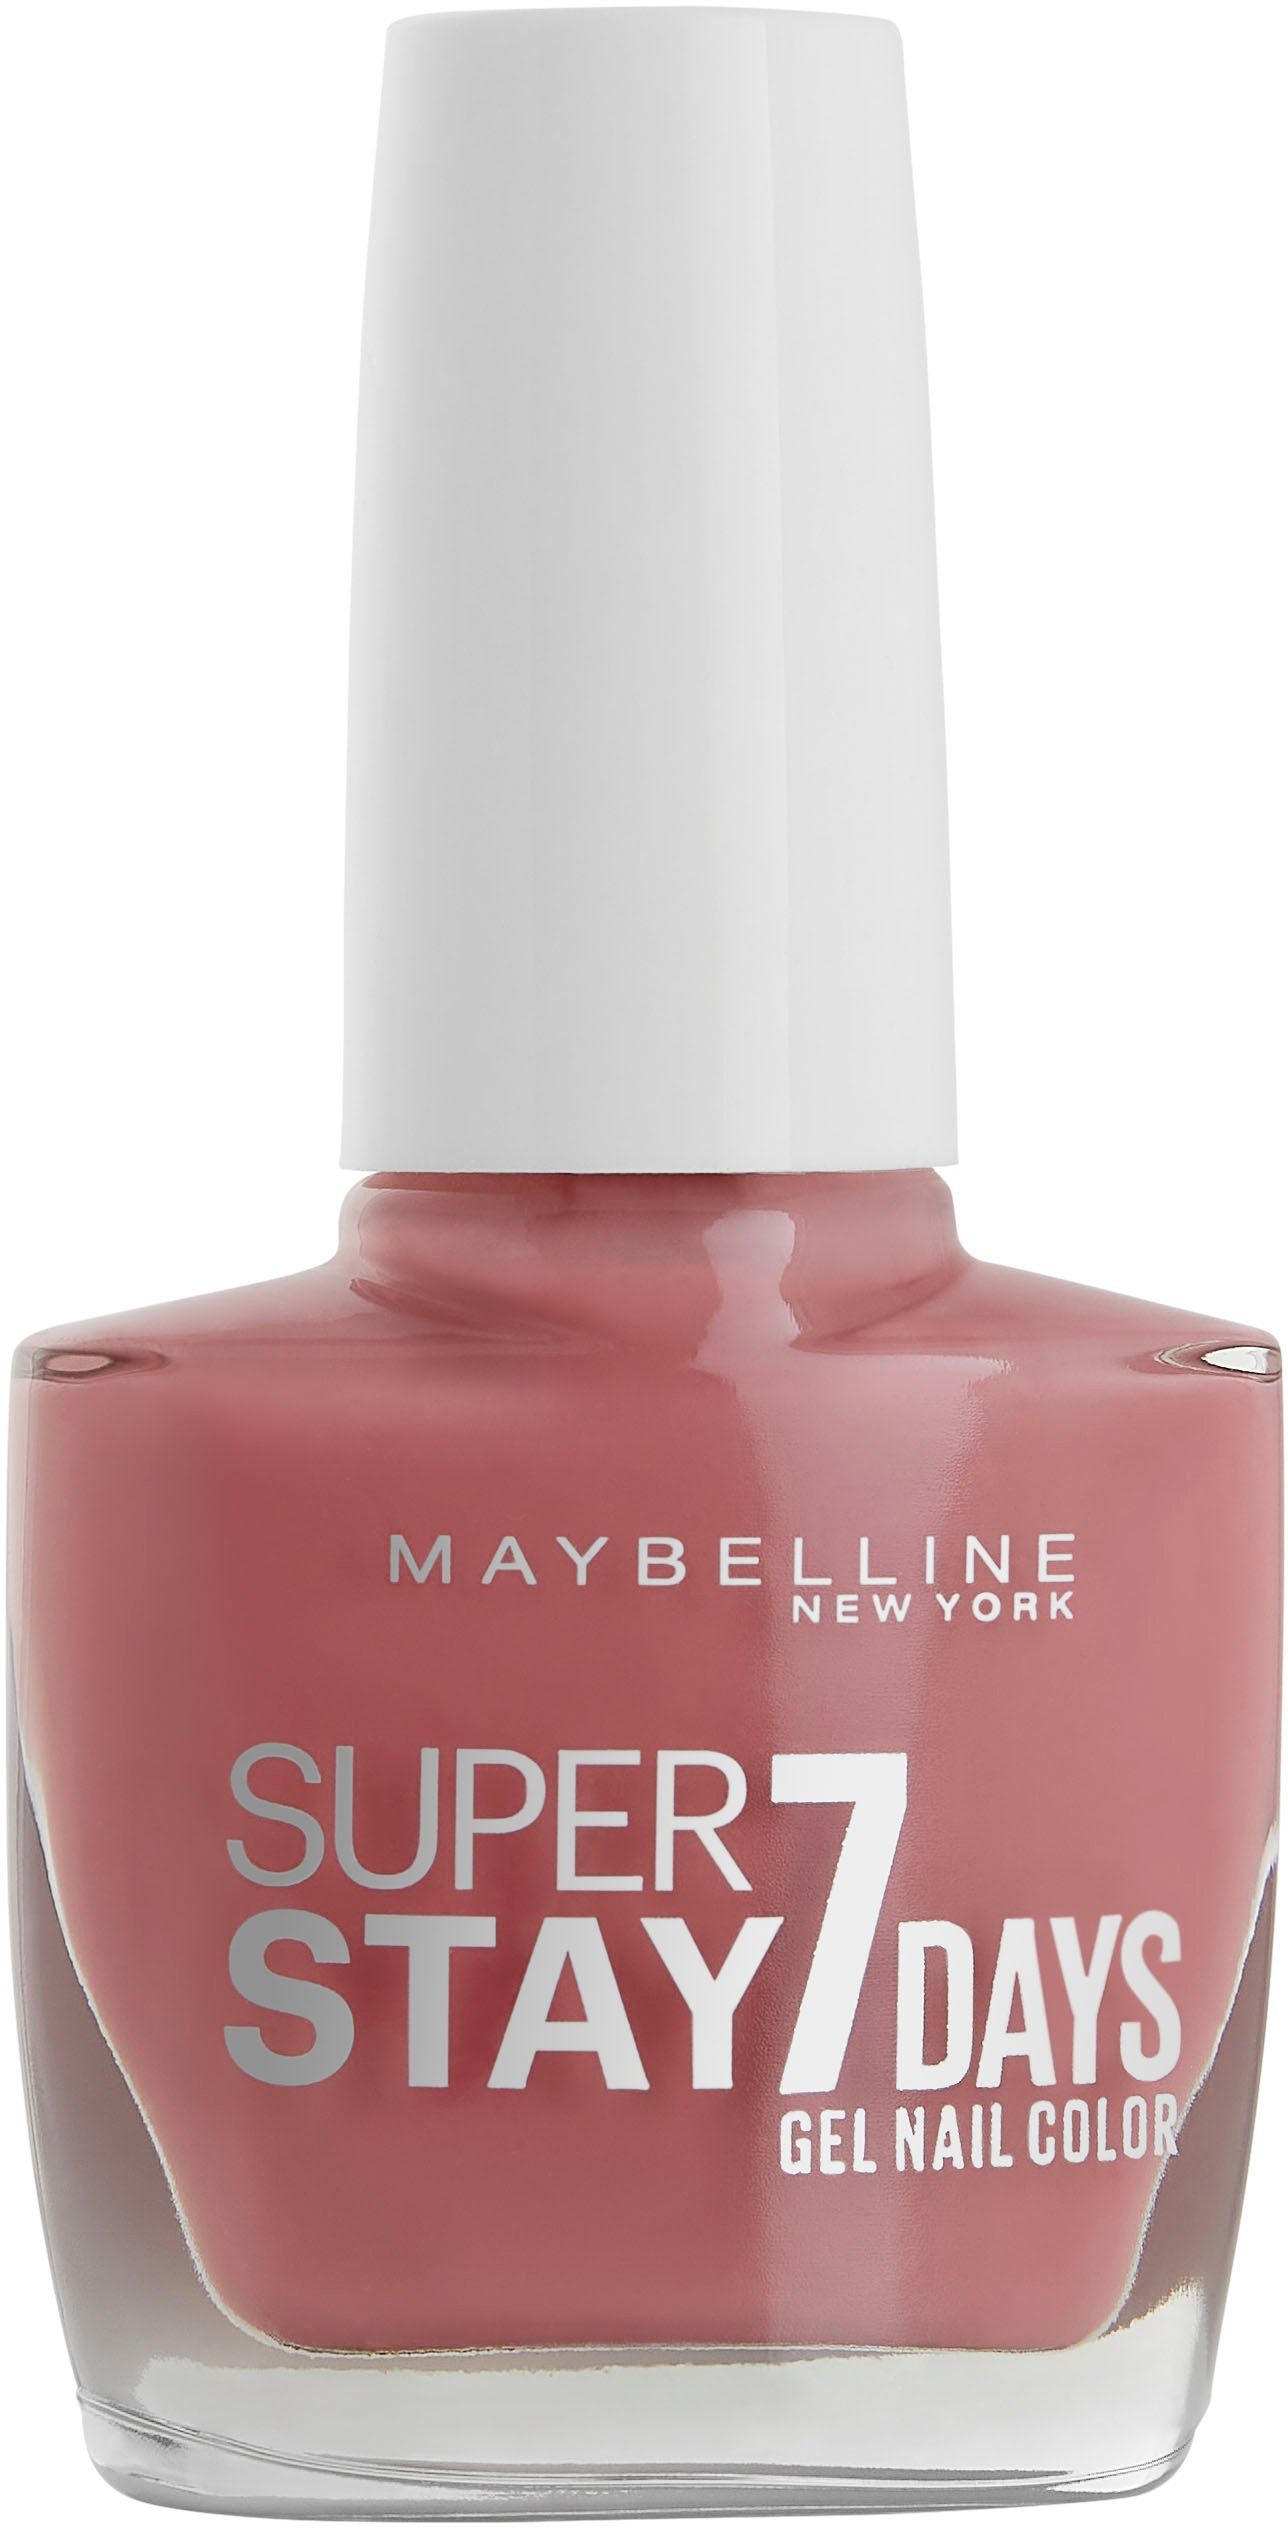 MAYBELLINE NEW YORK Nagellack Superstay 7 Days Nr. 926 Pink about it